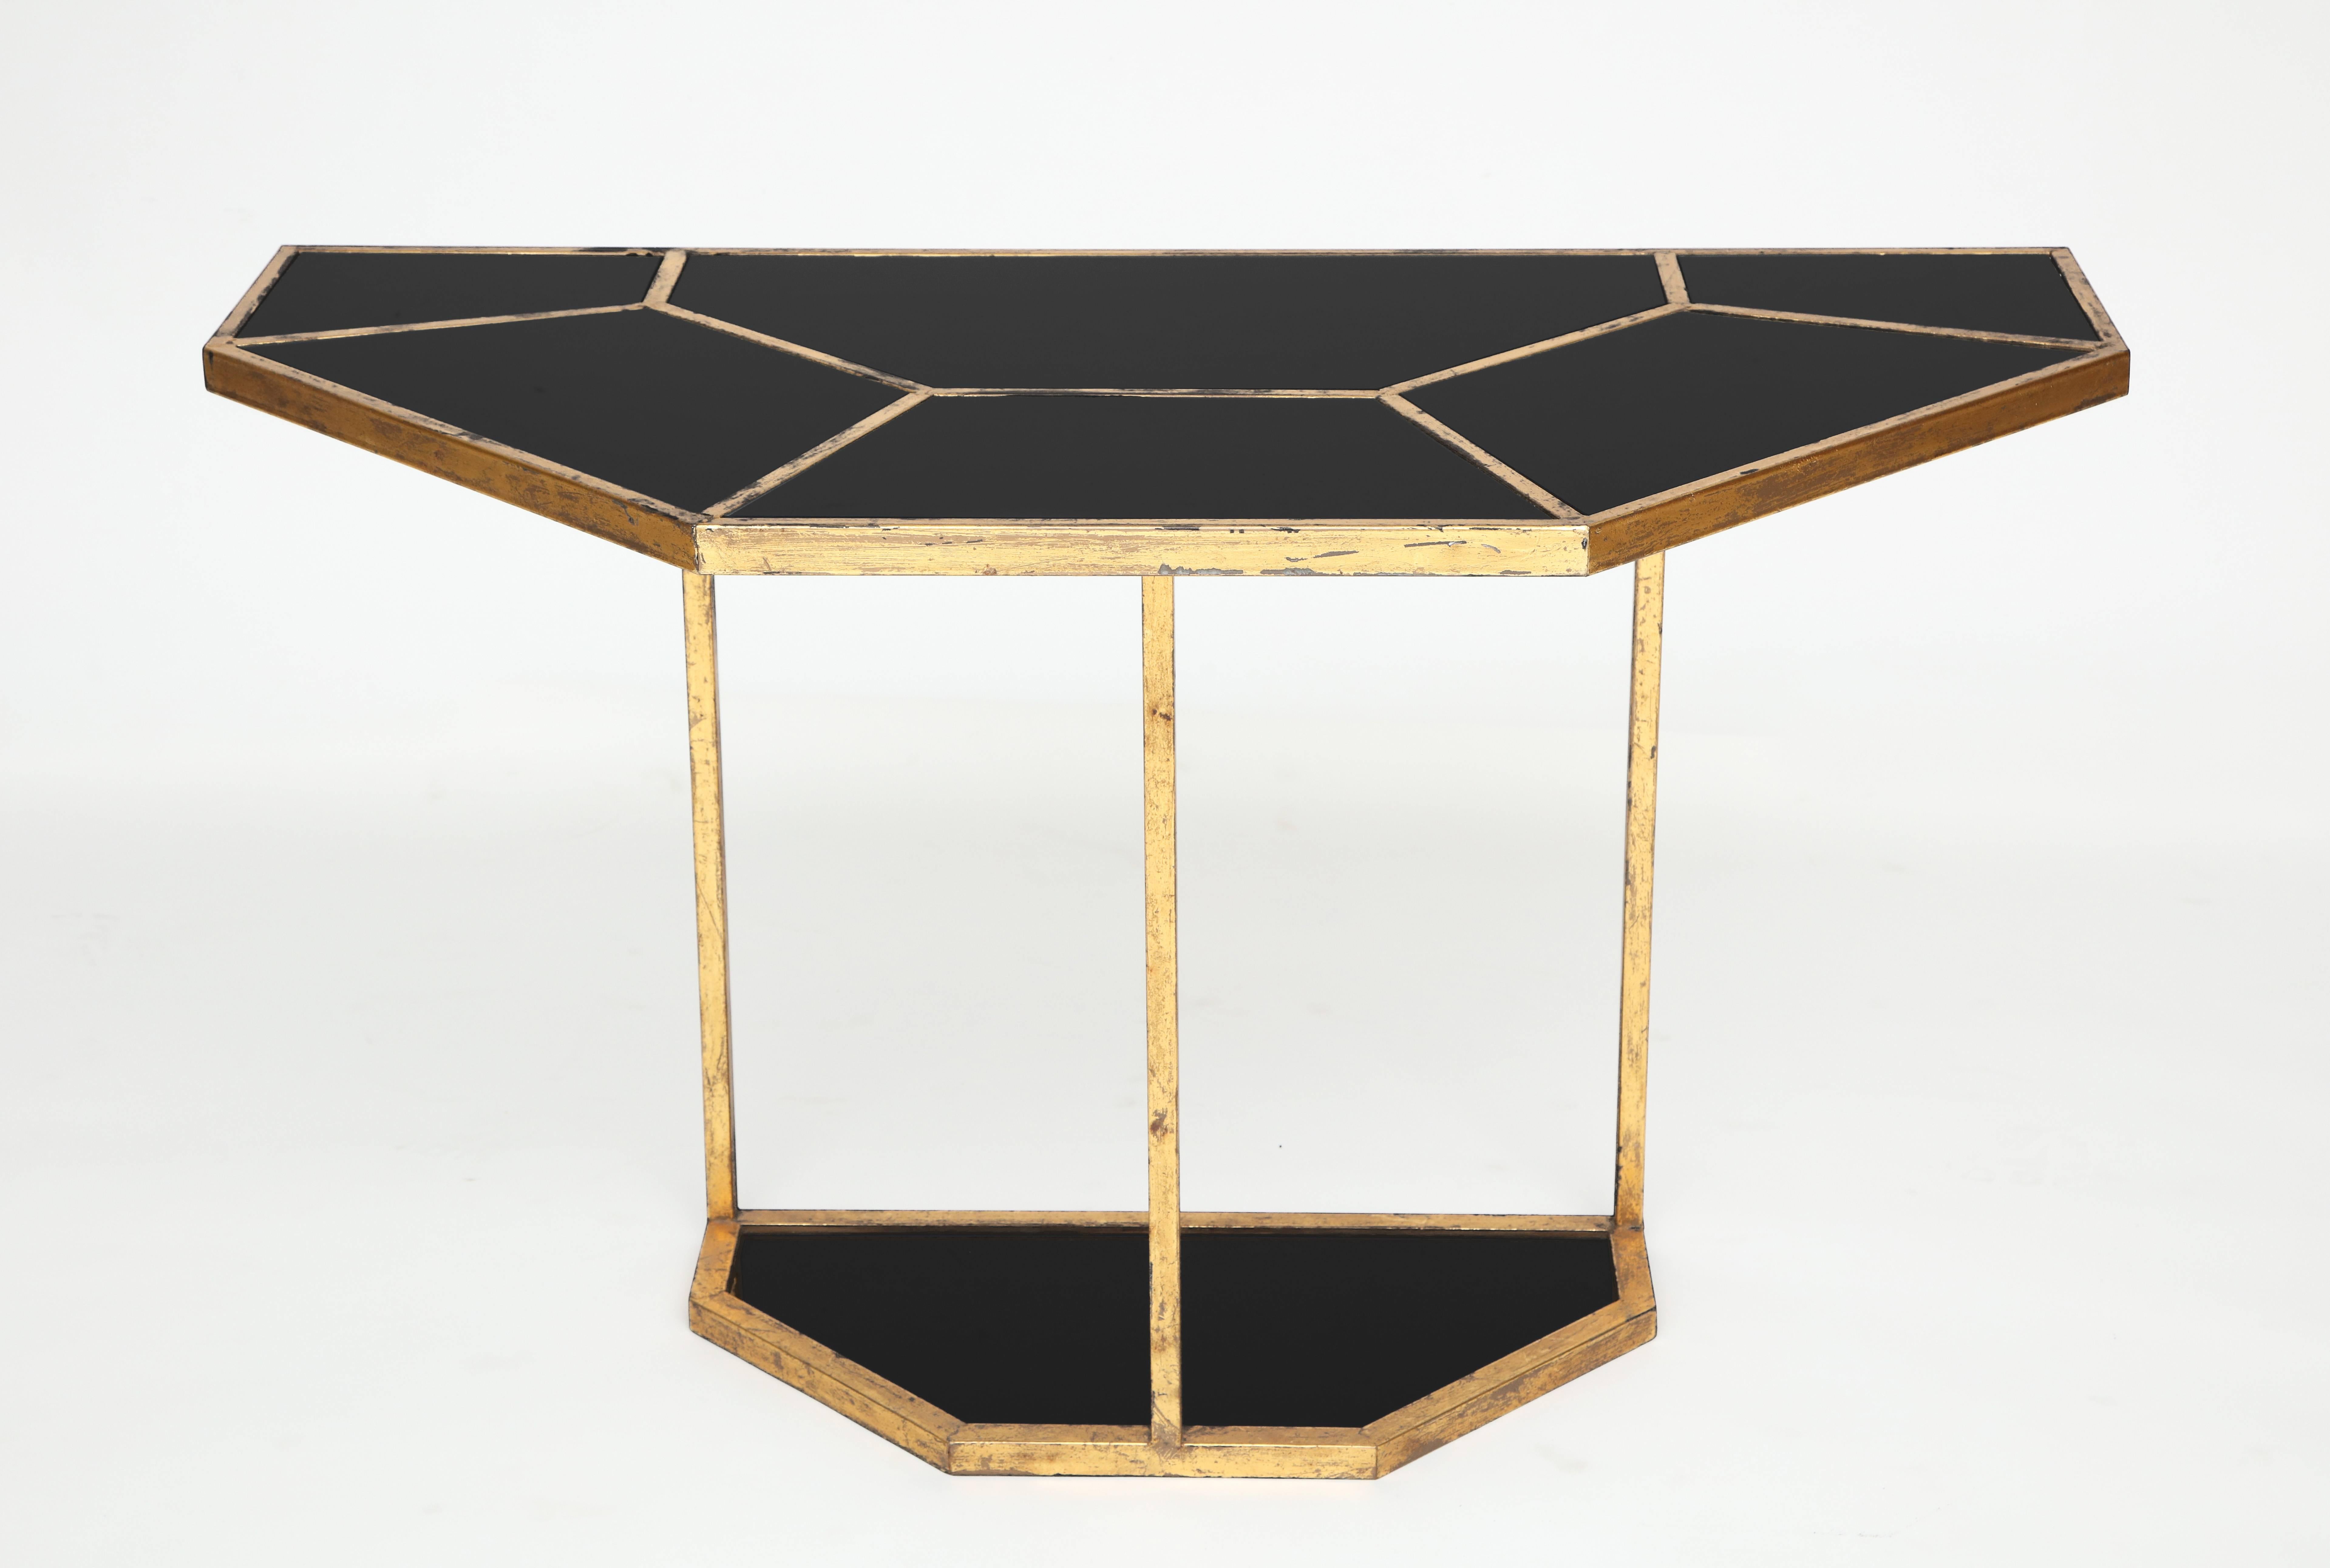 Gabriella Crespi style demilune brass black console, Mid-Century, 1970s-1980s

Gabriella Crespi style console. Similar to the puzzle table. This was probably made sometime in the last 20 years. Lovely patina on the brass and black opanline glass